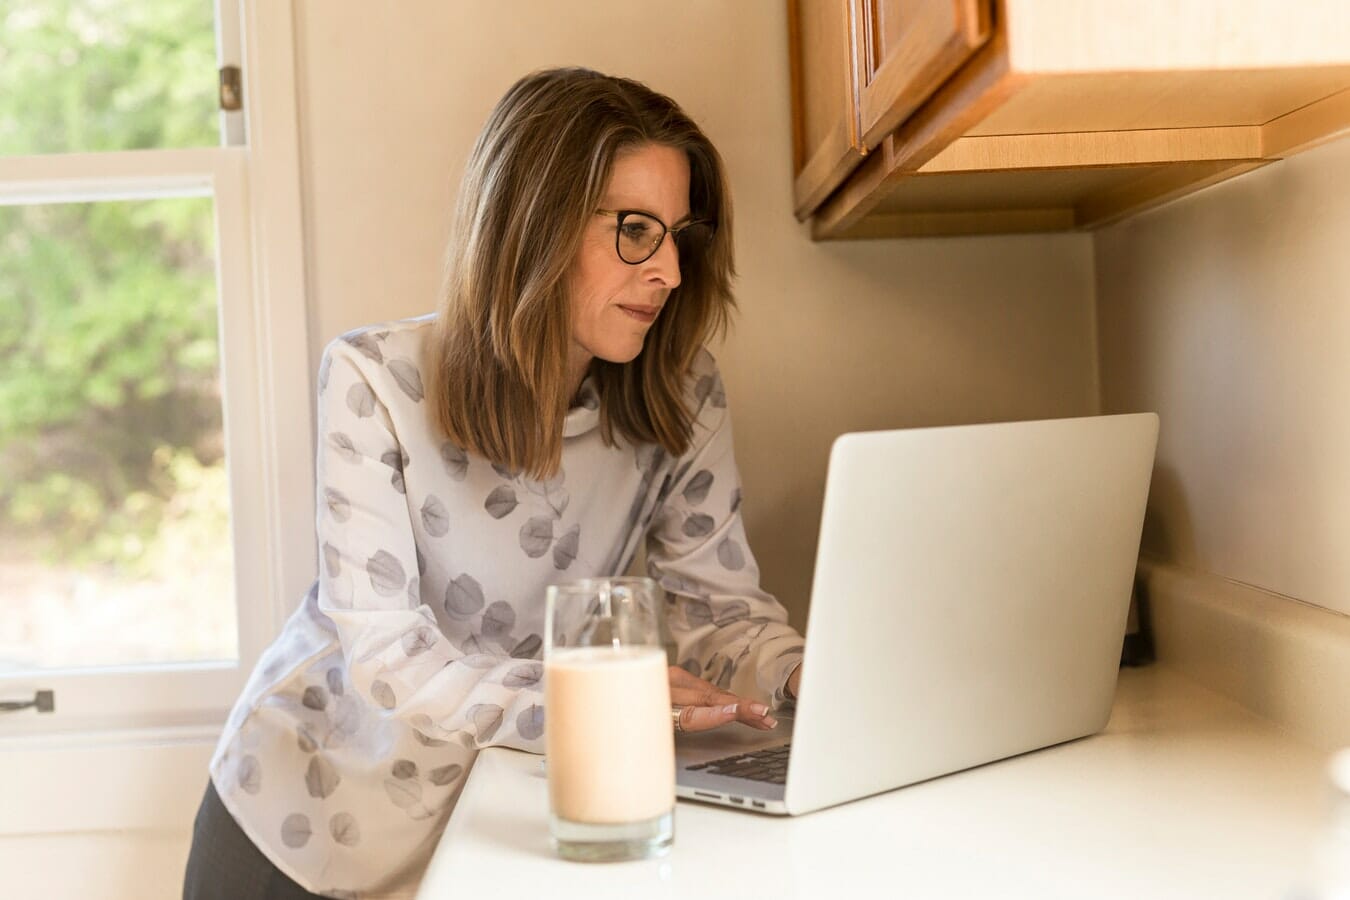 A woman using a laptop in her kitchen.